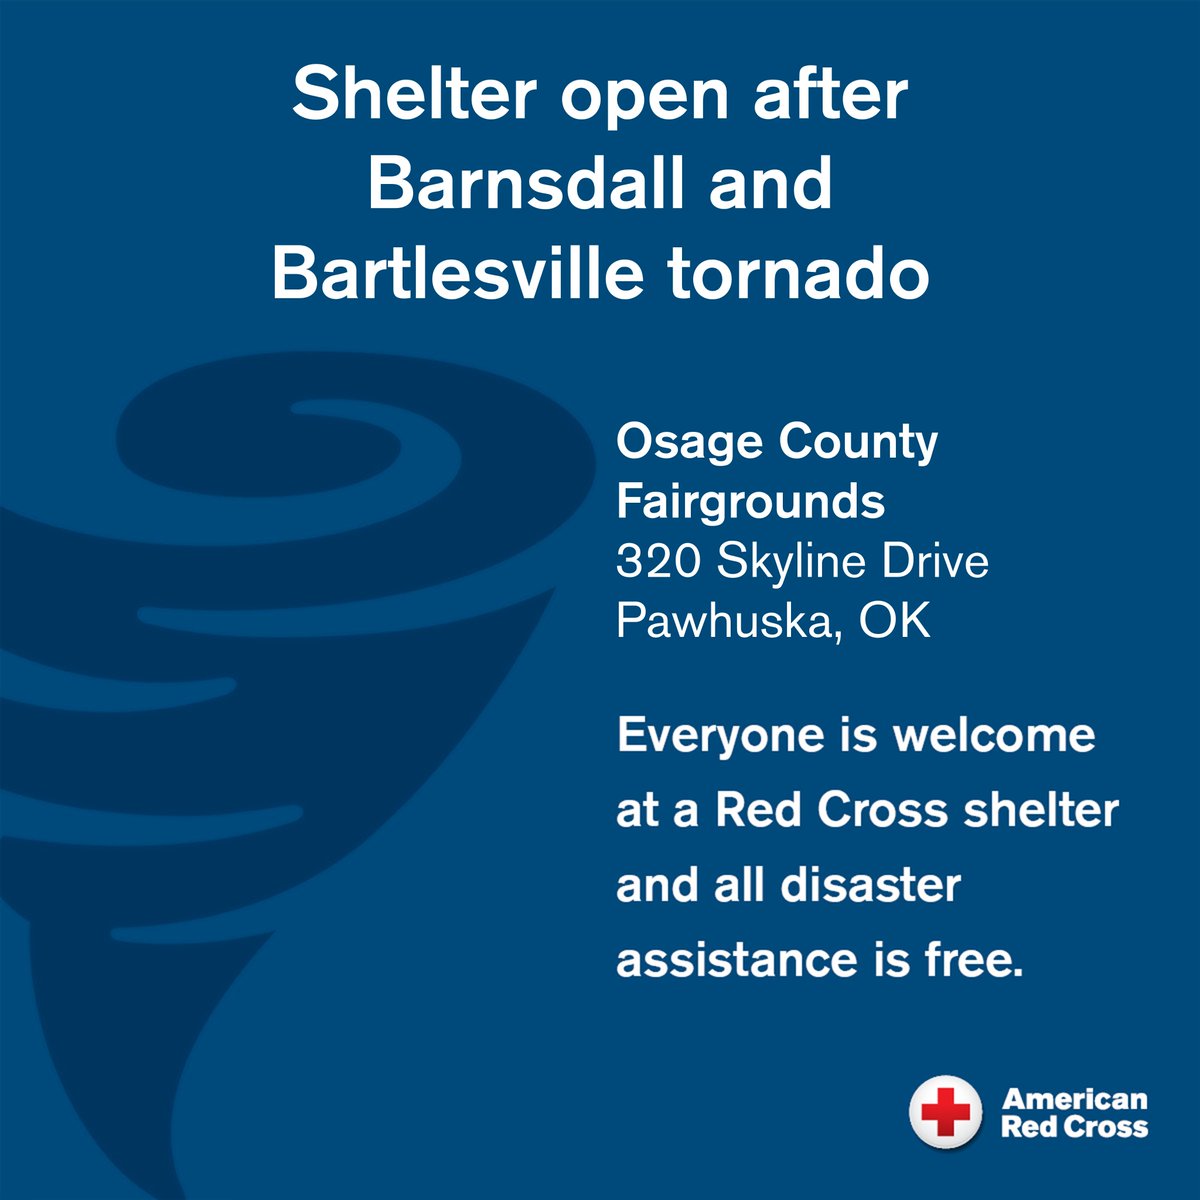 A shelter is open for residents of Barnsdall and other northeast Oklahoma communities affected by last night's tornado. Osage County Fairgrounds 320 Skyline Drive Pawhuska, OK You can access Red Cross services here even if you don’t need a place to sleep. 1/3